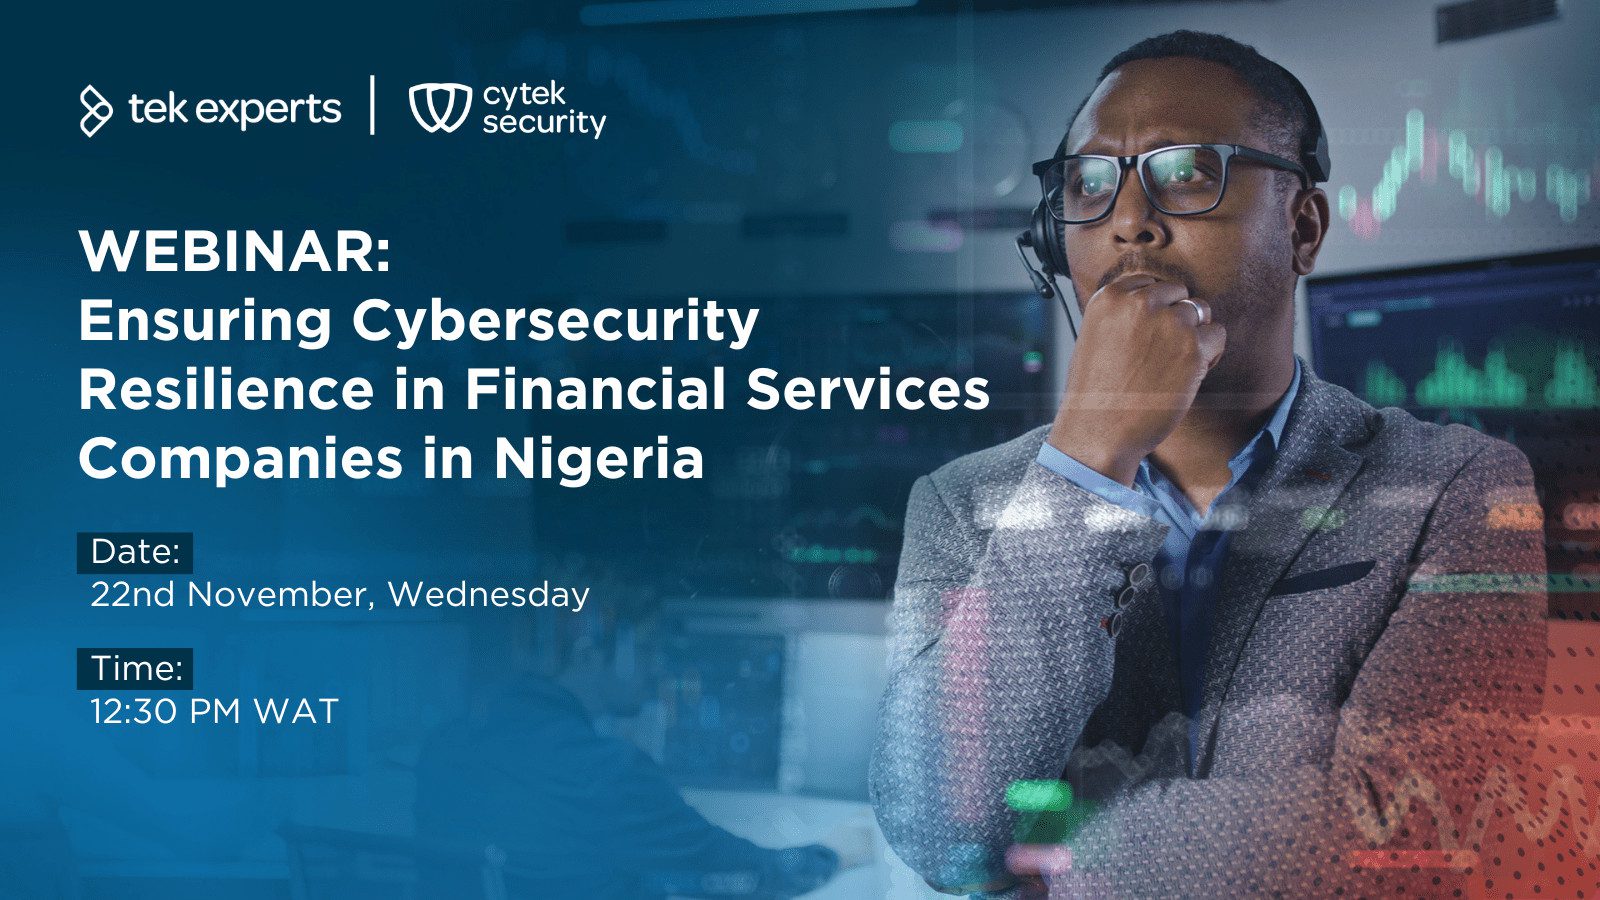 Ensuring Cybersecurity Resilience in Financial Services Companies in Nigeria